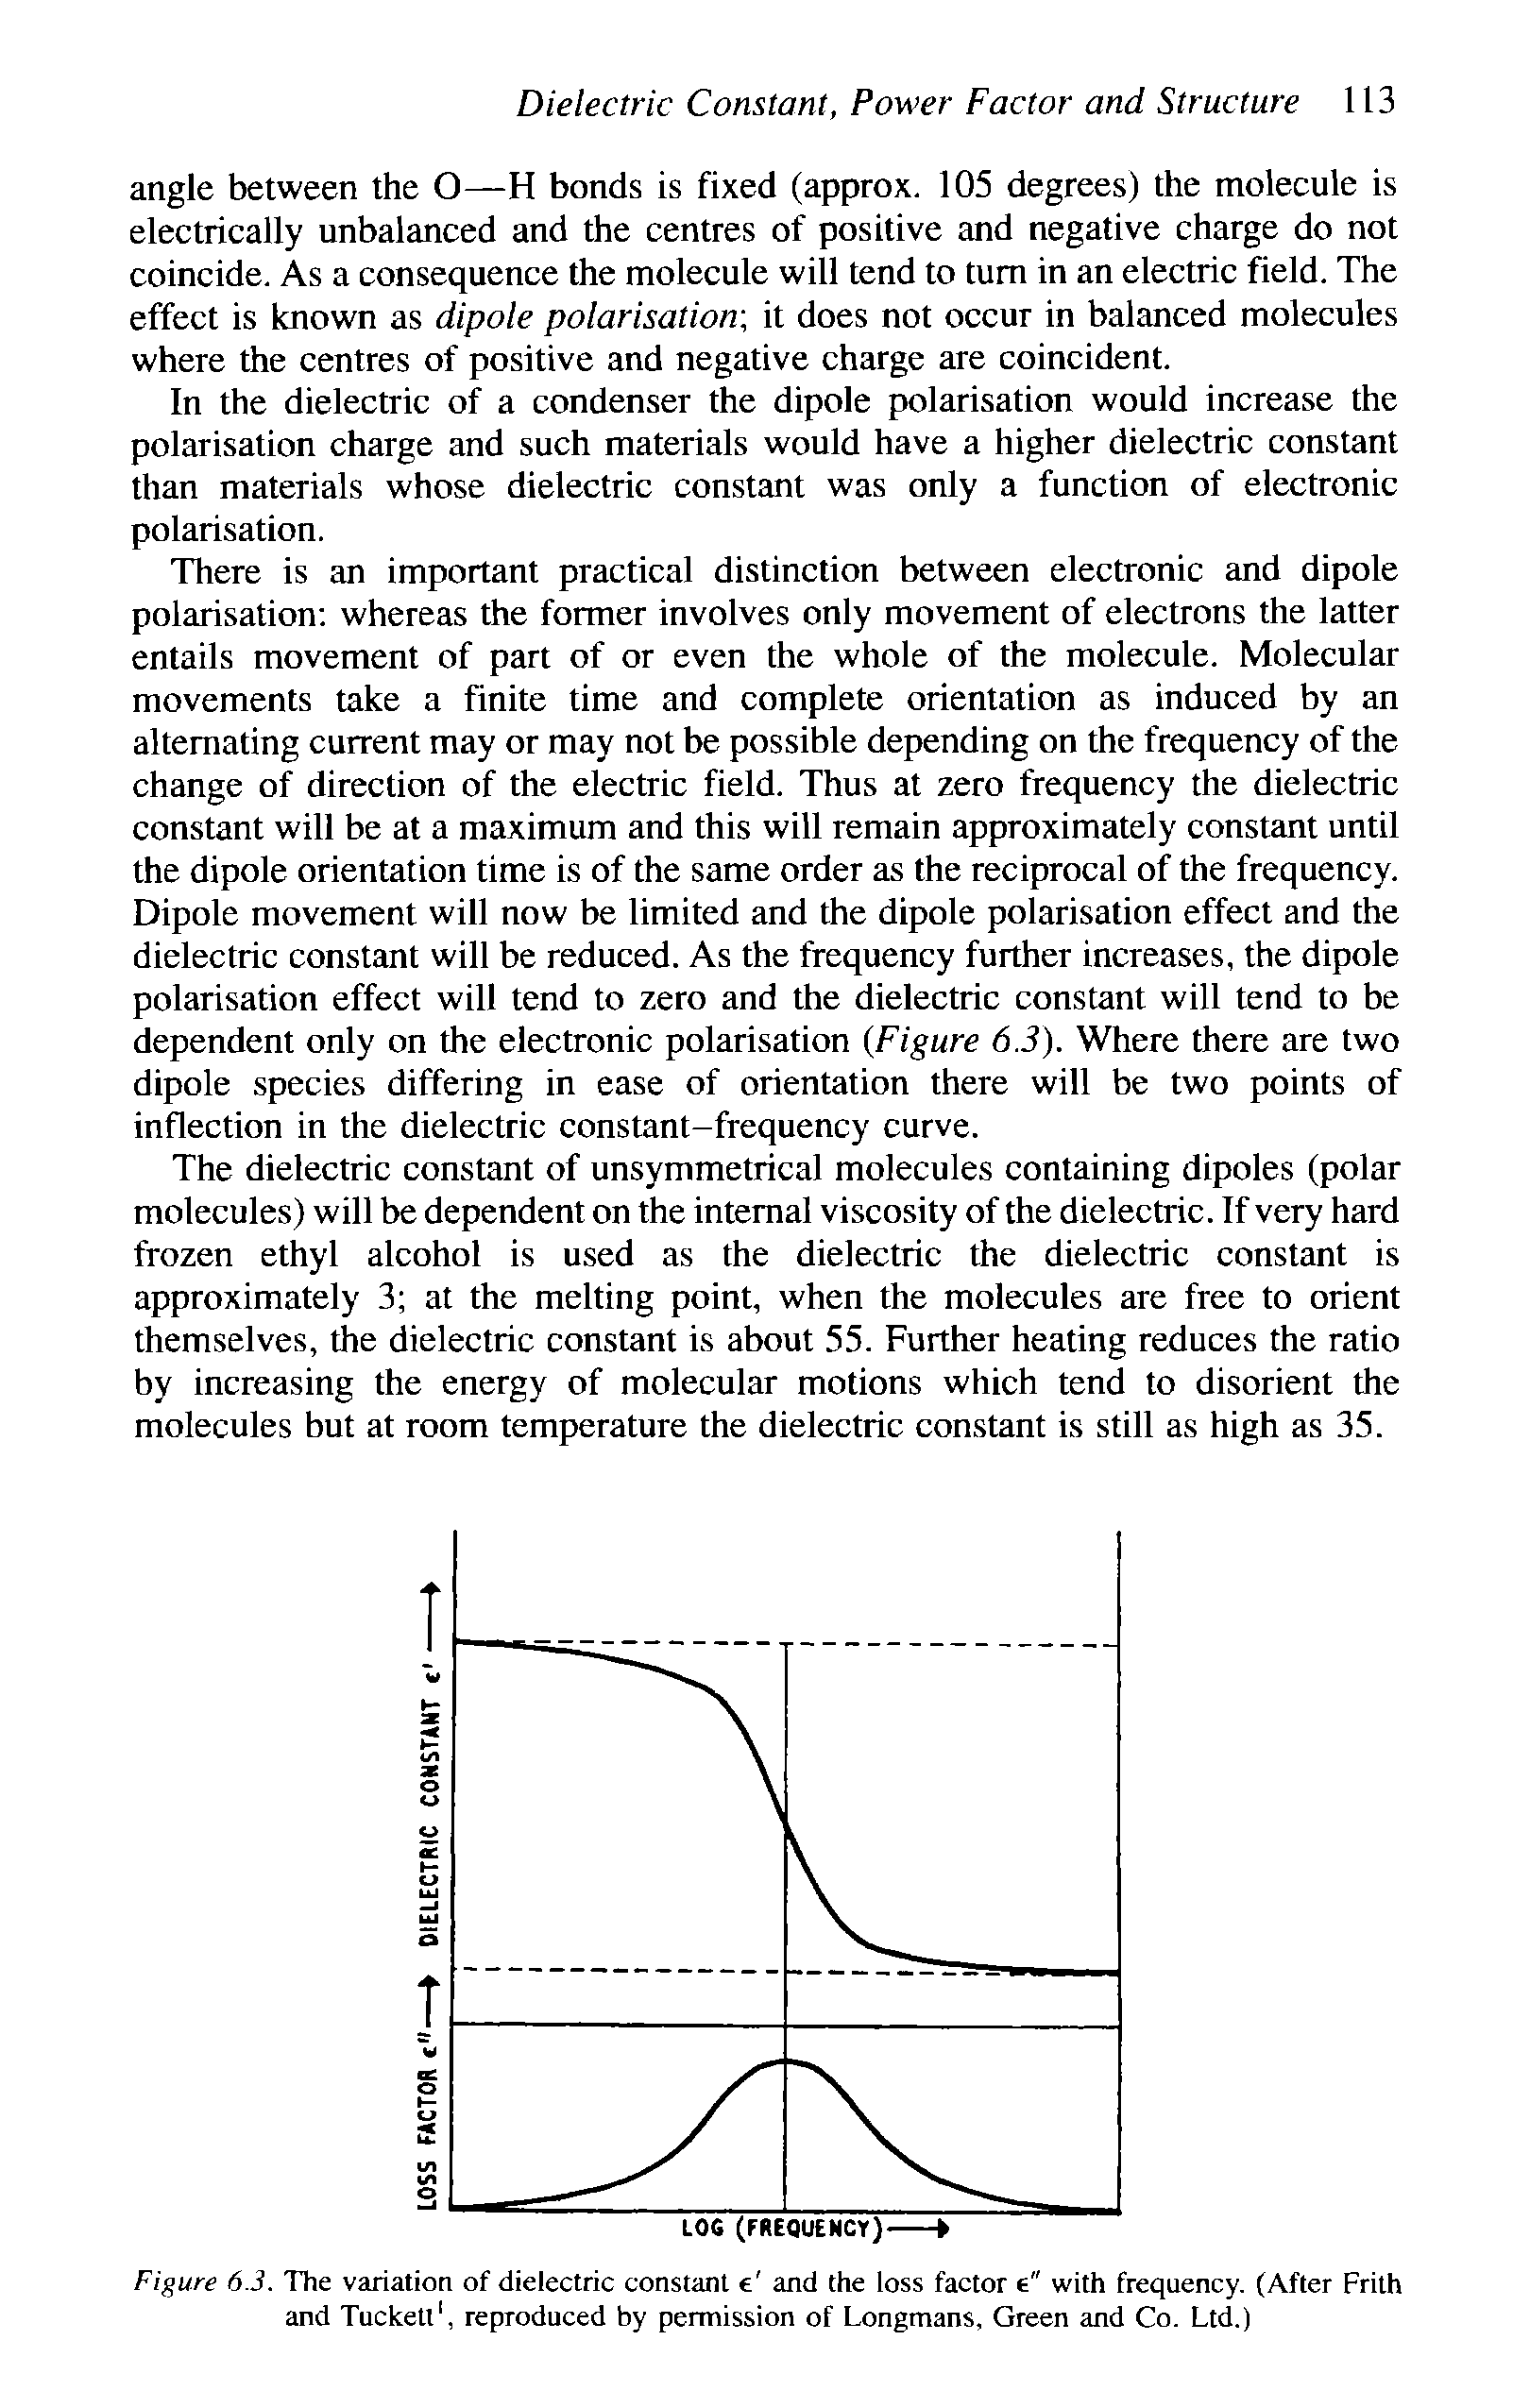 Figure 6.3. The variation of dielectric constant e and the loss factor e" with frequency. (After Frith and Tucketl, reproduced by permission of Longmans, Green and Co. Ltd.)...